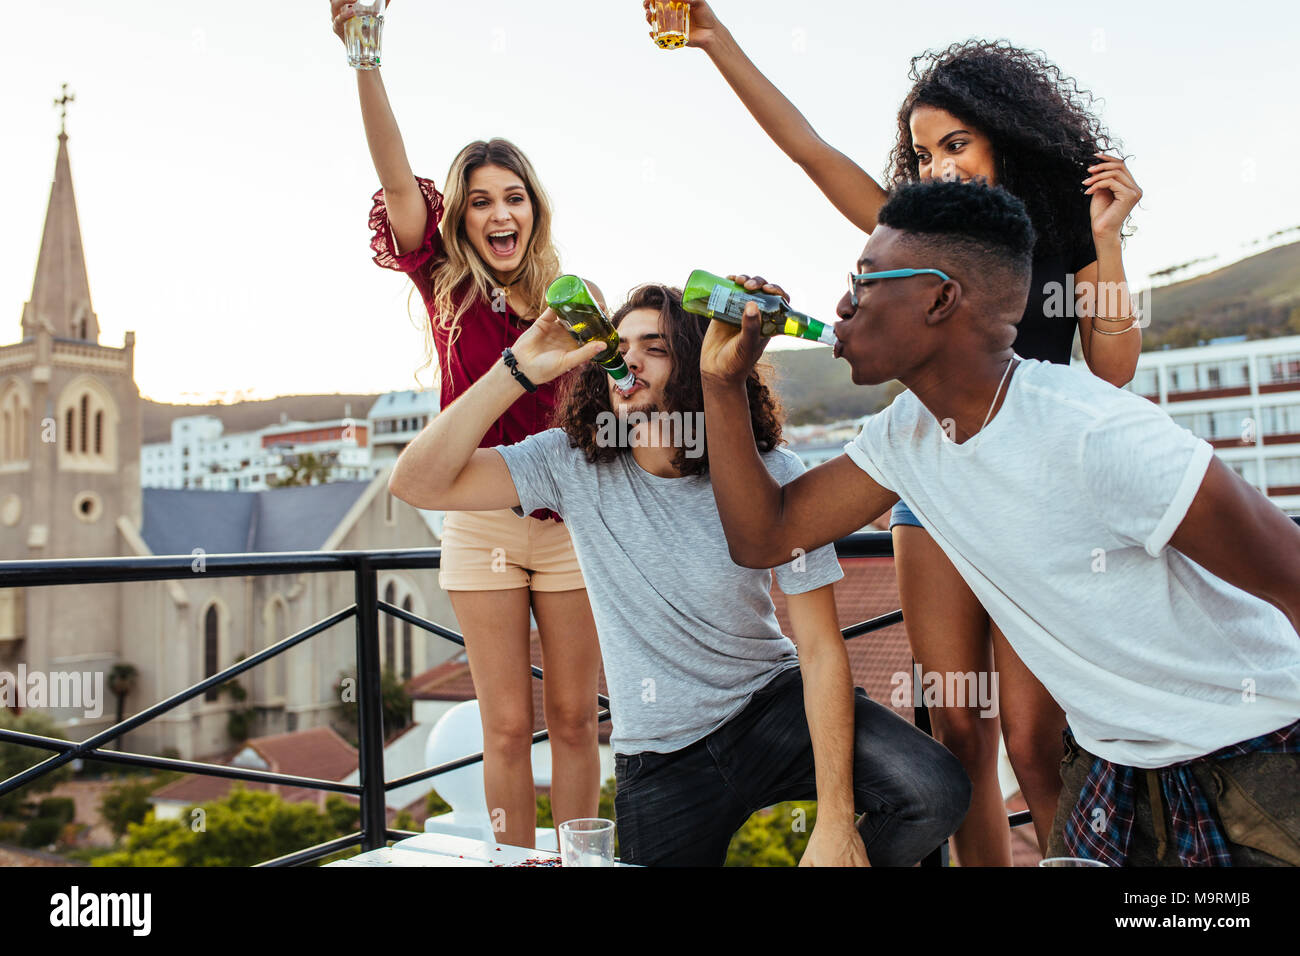 Multiracial young people partying on terrace, with men drinking beers together and girls cheering. Beer drinking challenge at rooftop party. Stock Photo